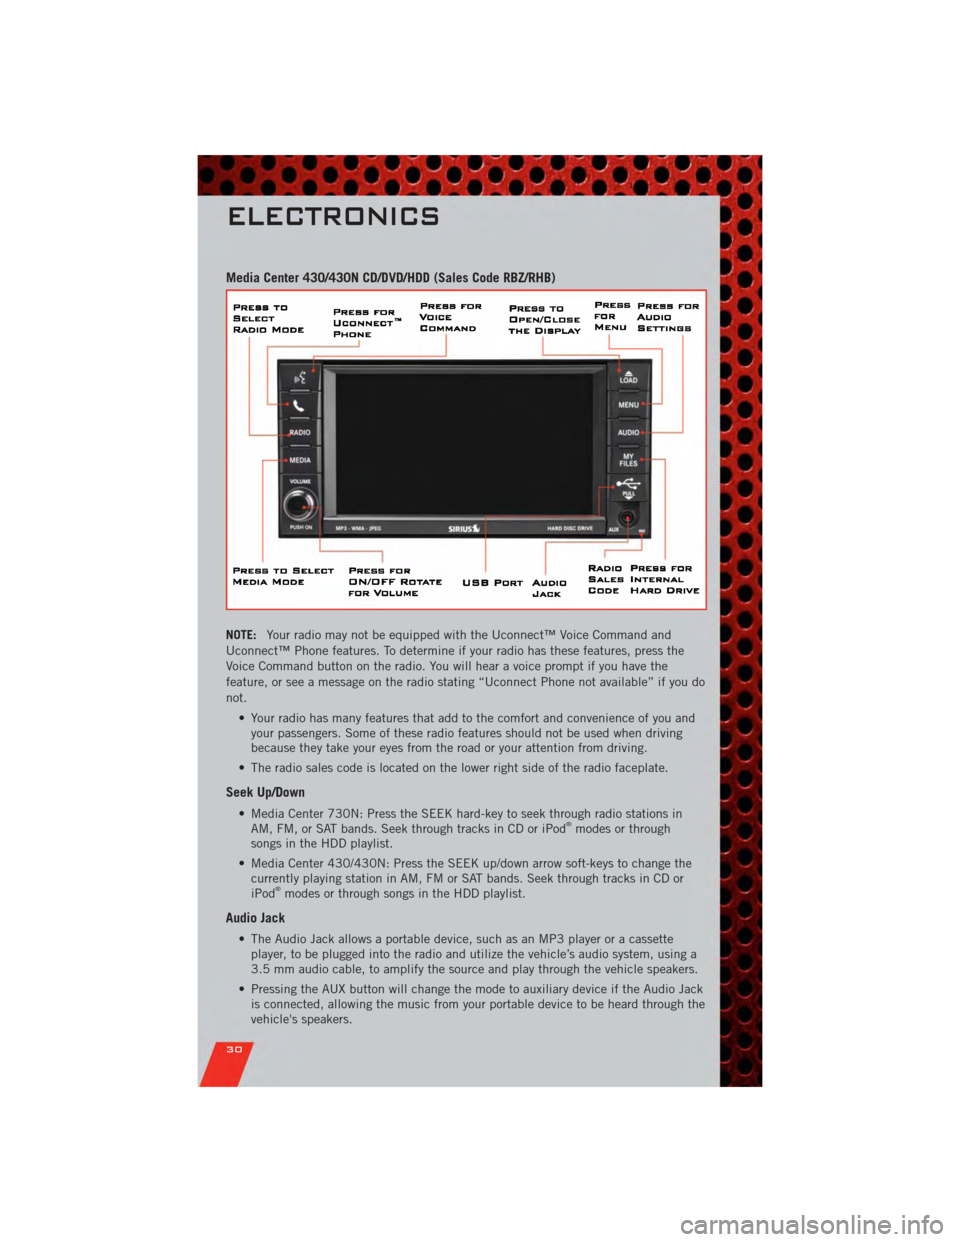 DODGE NITRO 2011 1.G User Guide Media Center 430/430N CD/DVD/HDD (Sales Code RBZ/RHB)
NOTE:Your radio may not be equipped with the Uconnect™ Voice Command and
Uconnect™ Phone features. To determine if your radio has these featur